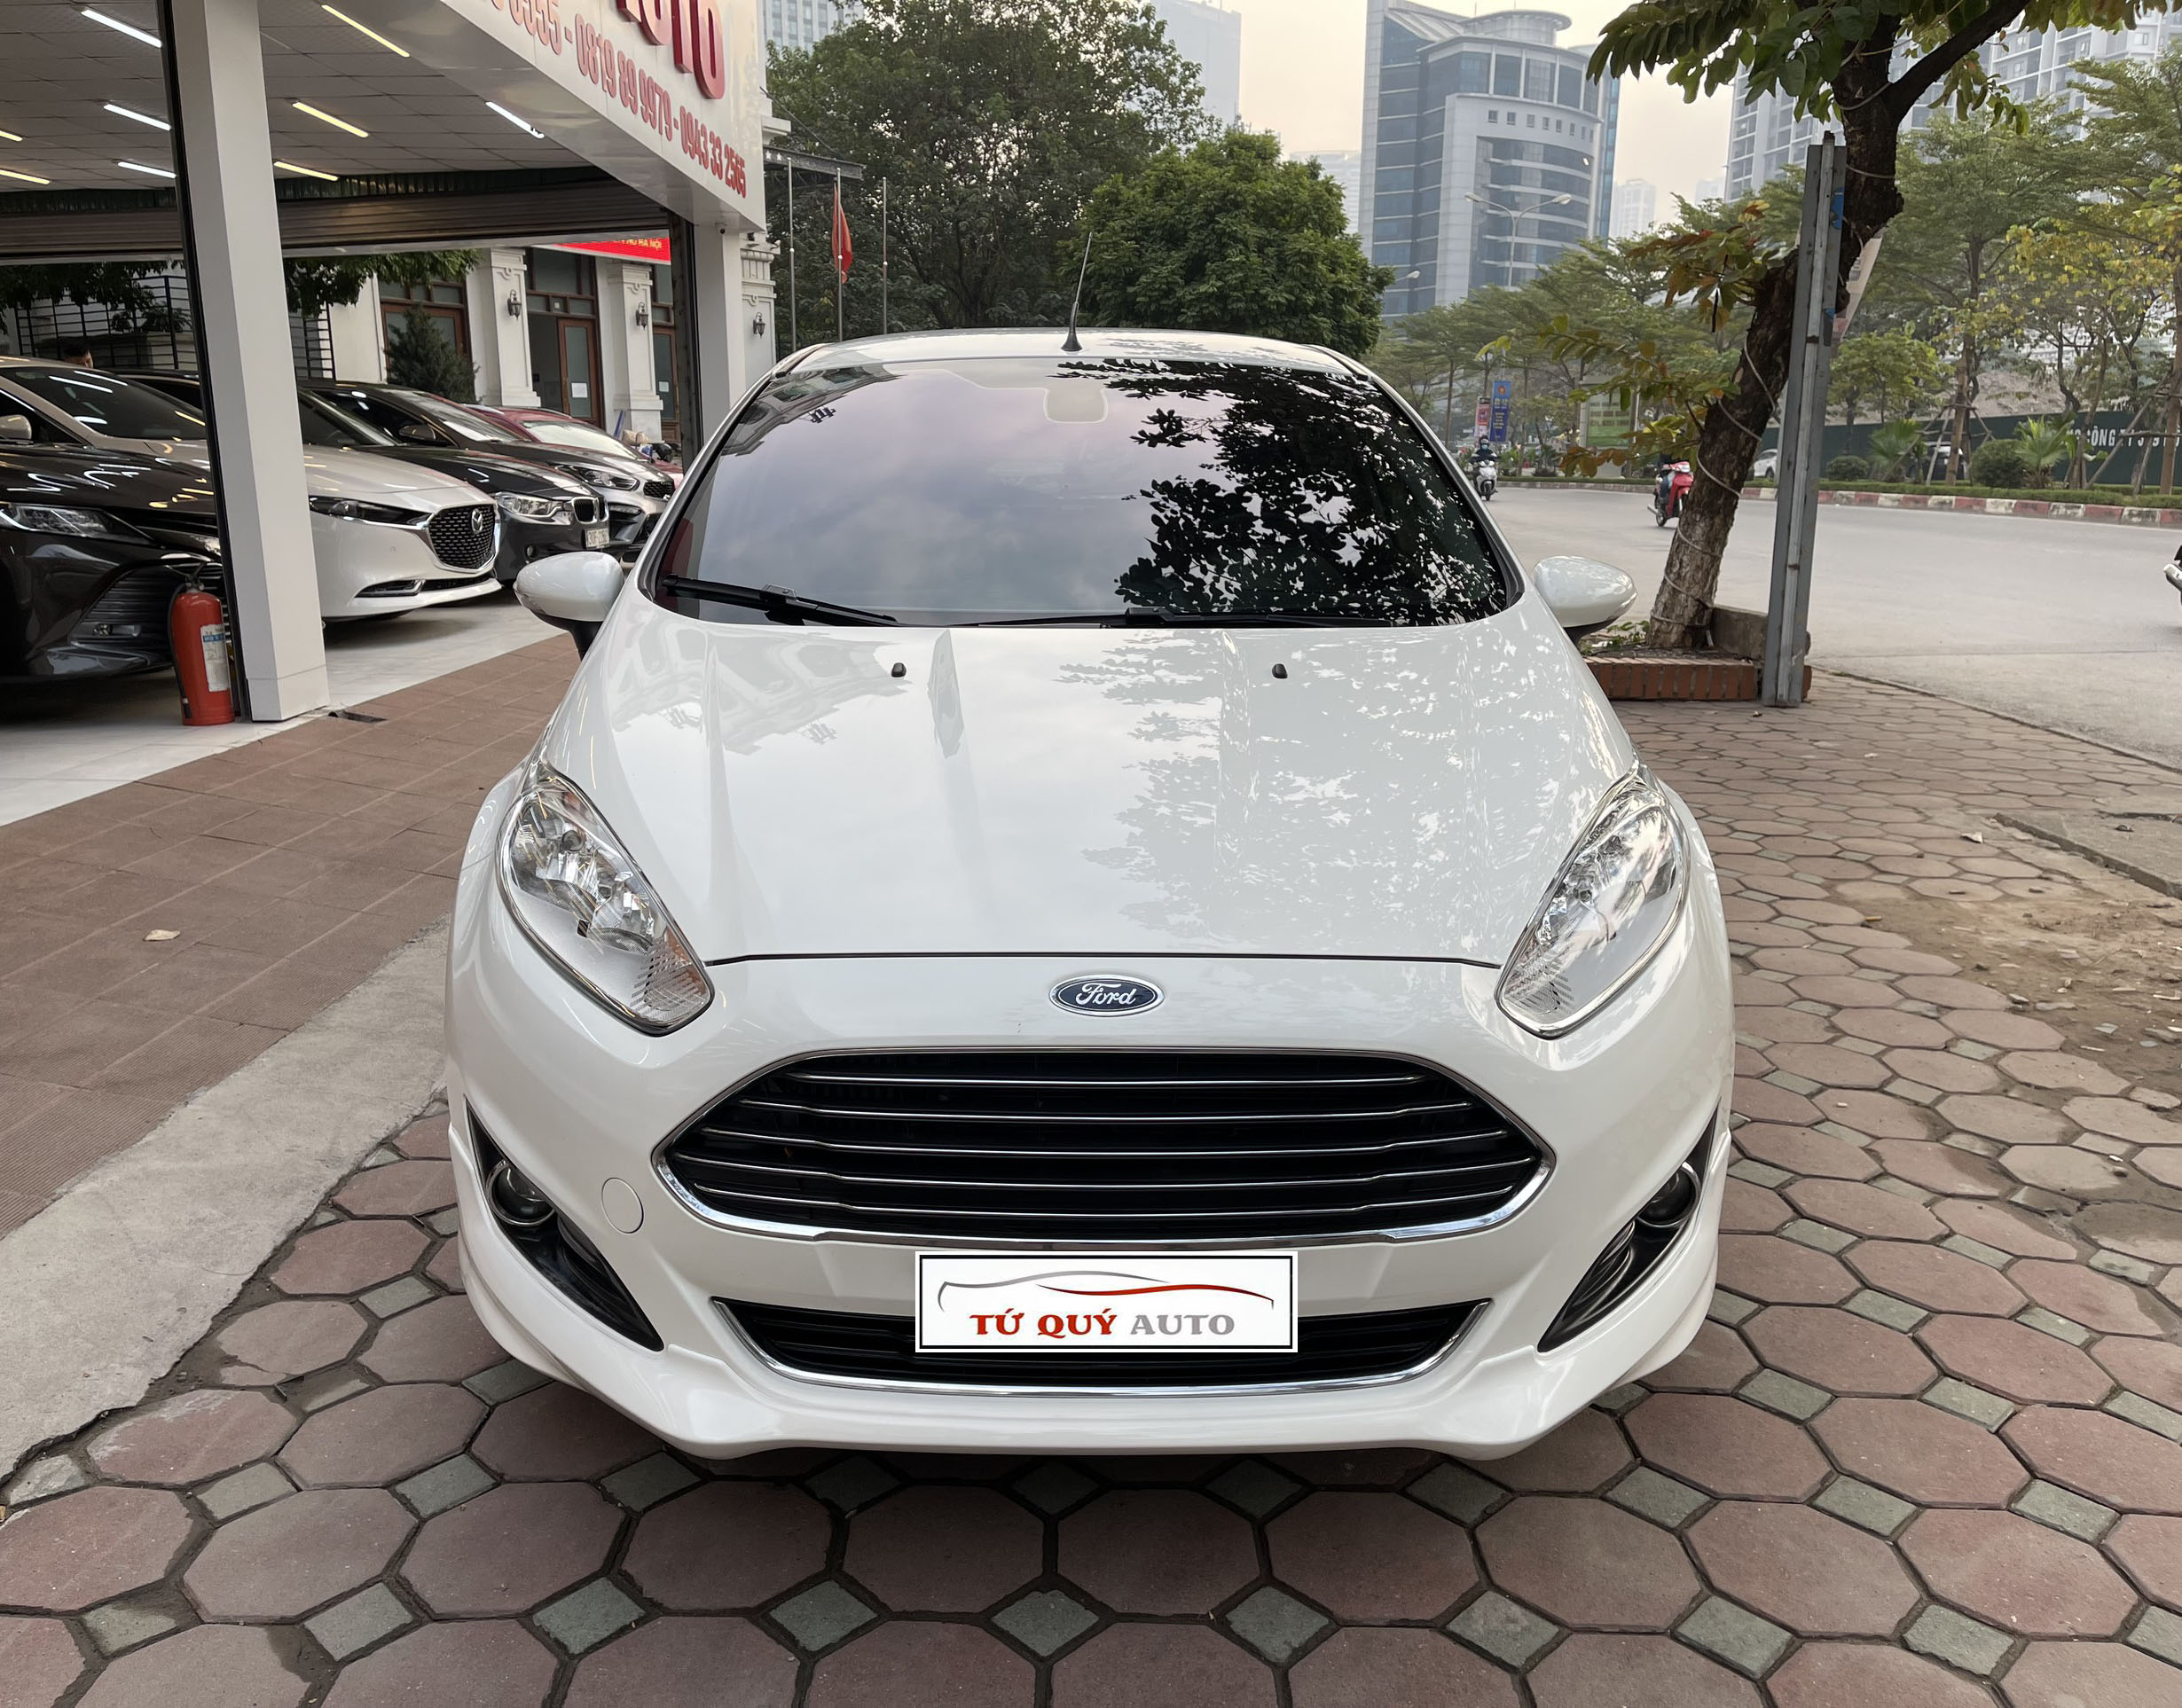 2019 Ford Fiesta SE Hatchback Full Specs Features and Price  CarBuzz